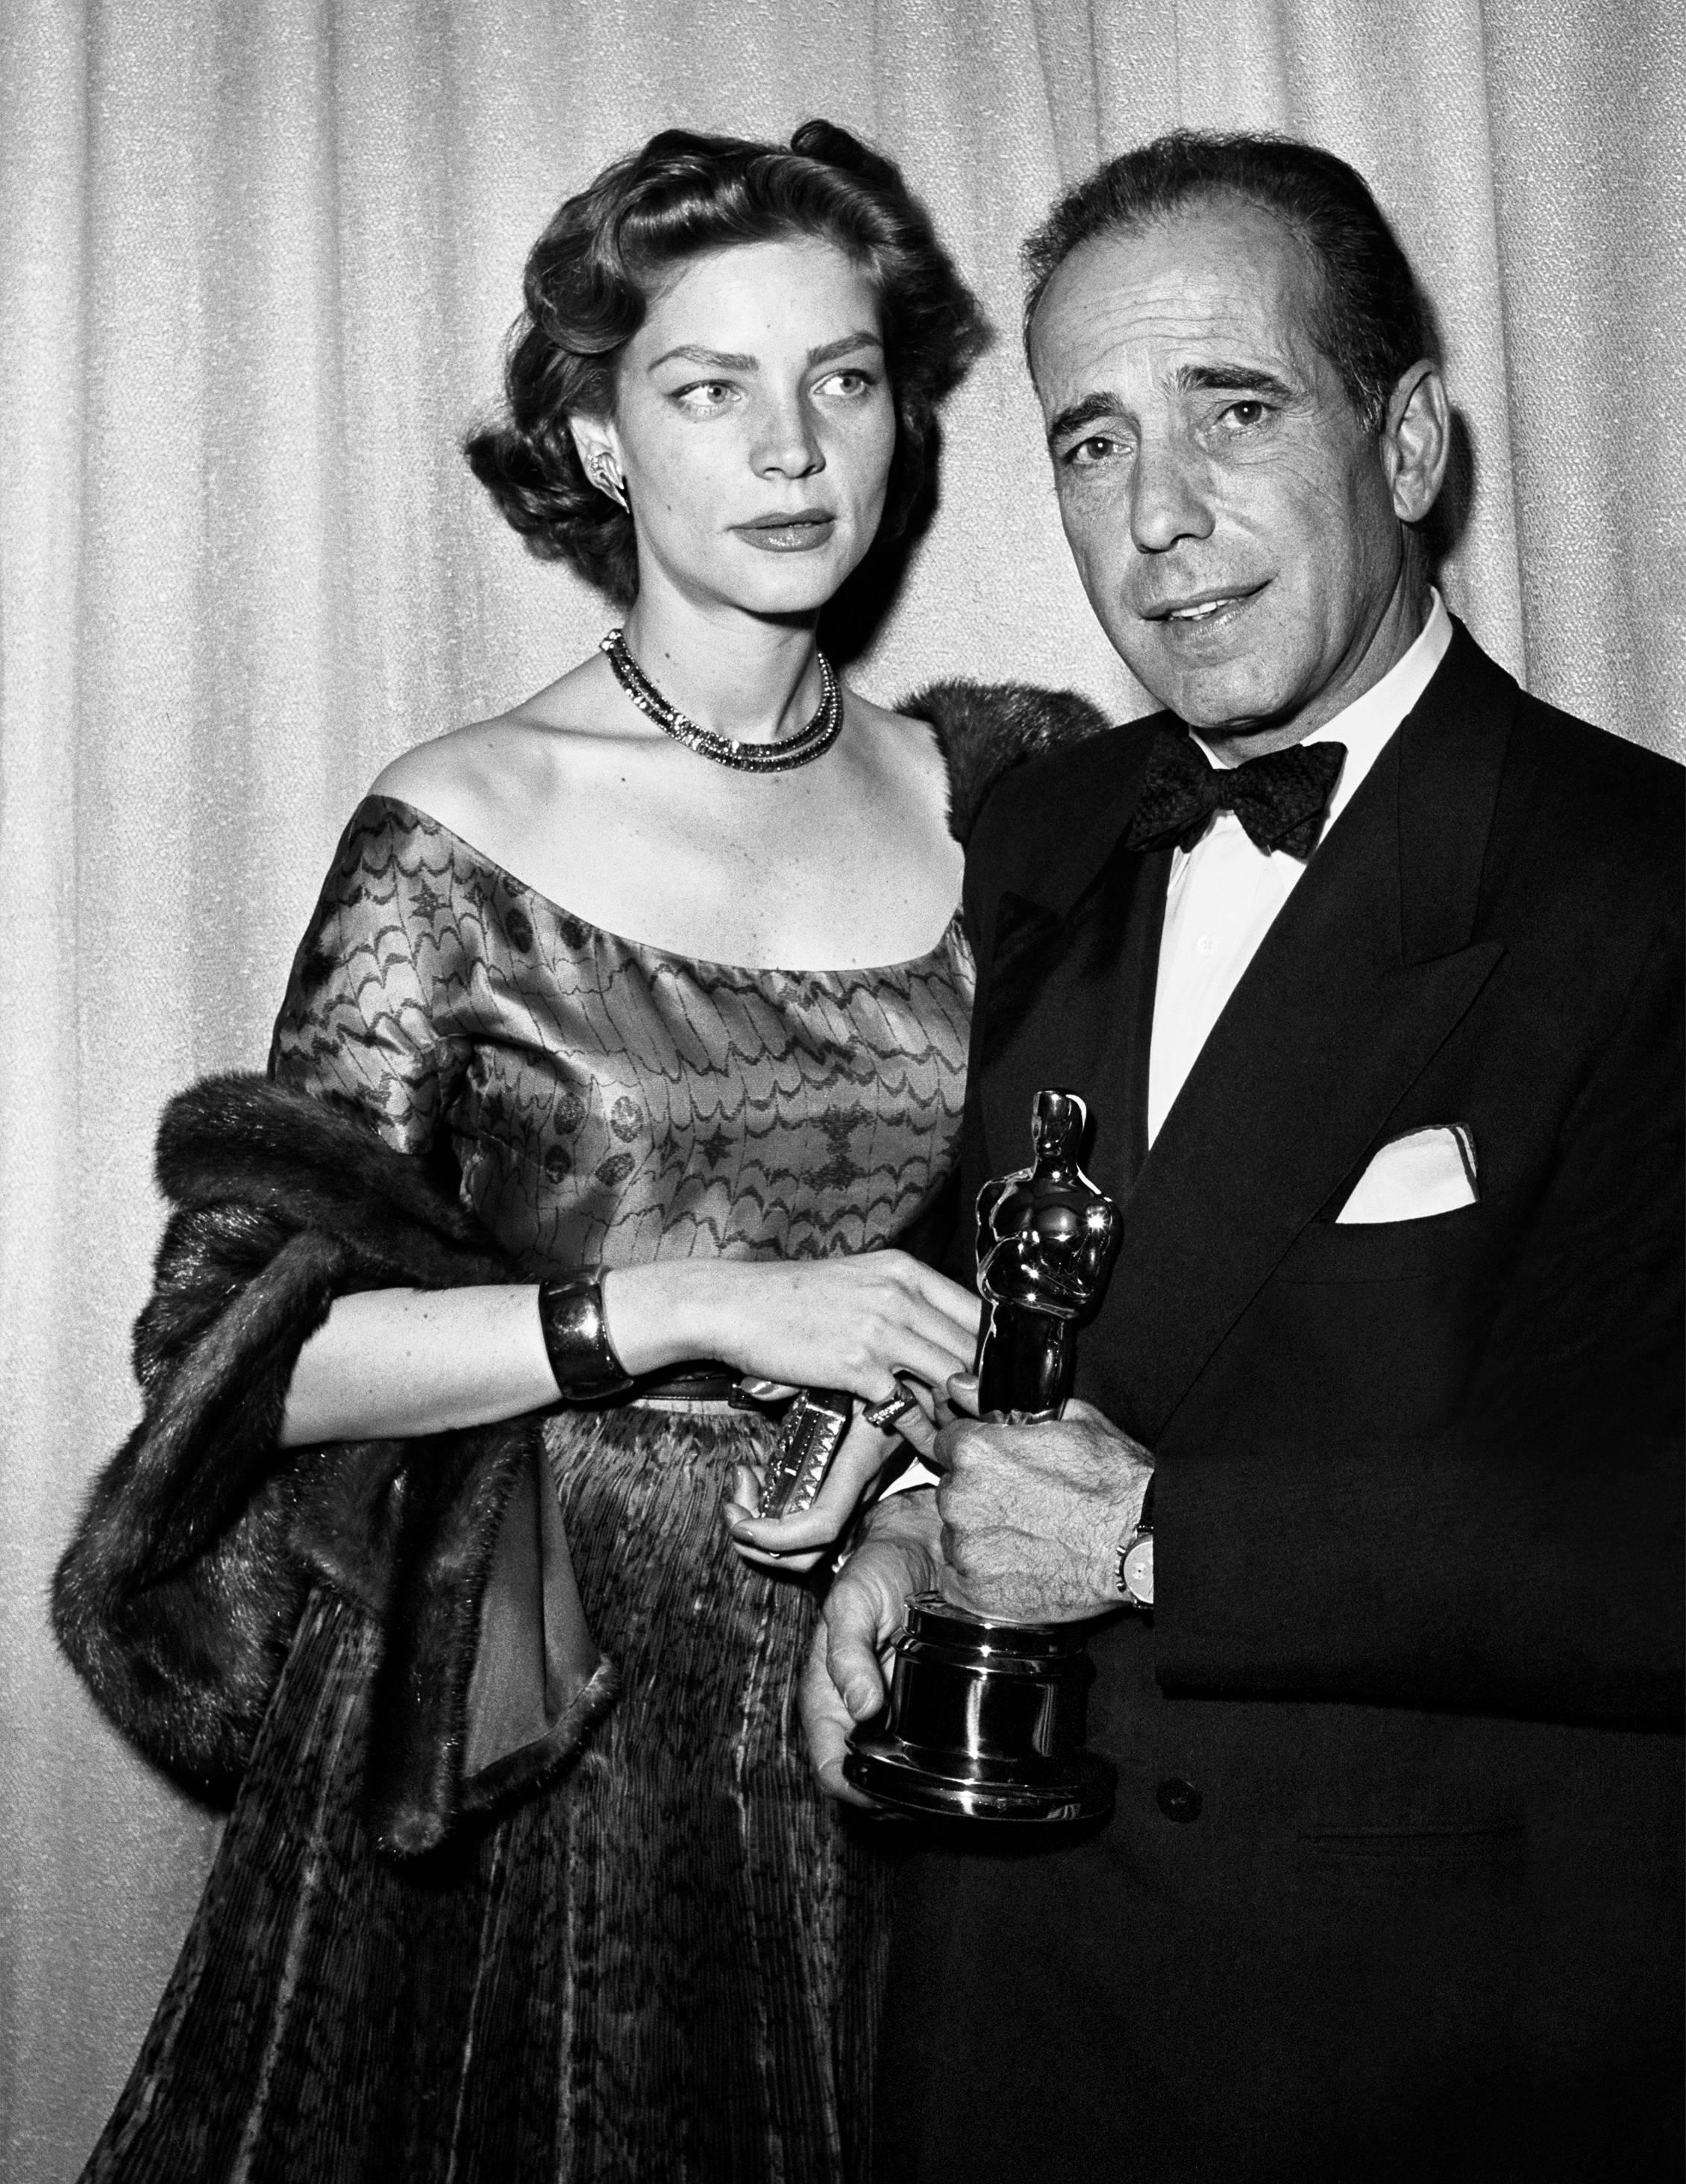 Frank Worth Black and White Photograph - Lauren Bacall and Humphrey Bogart at the Oscars Fine Art Print